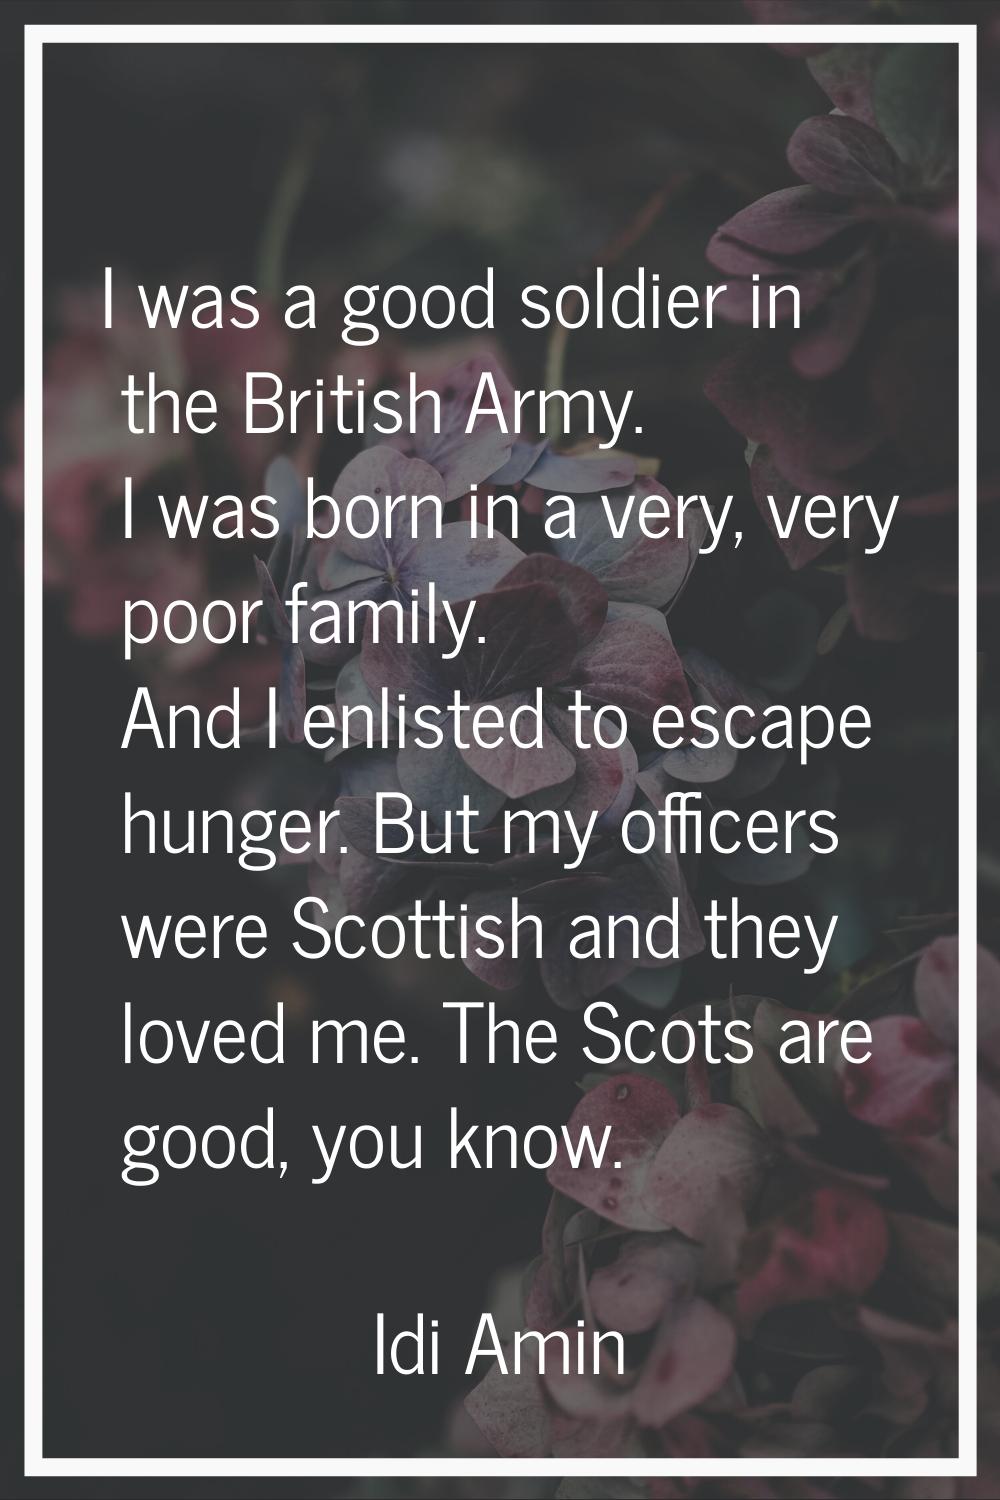 I was a good soldier in the British Army. I was born in a very, very poor family. And I enlisted to